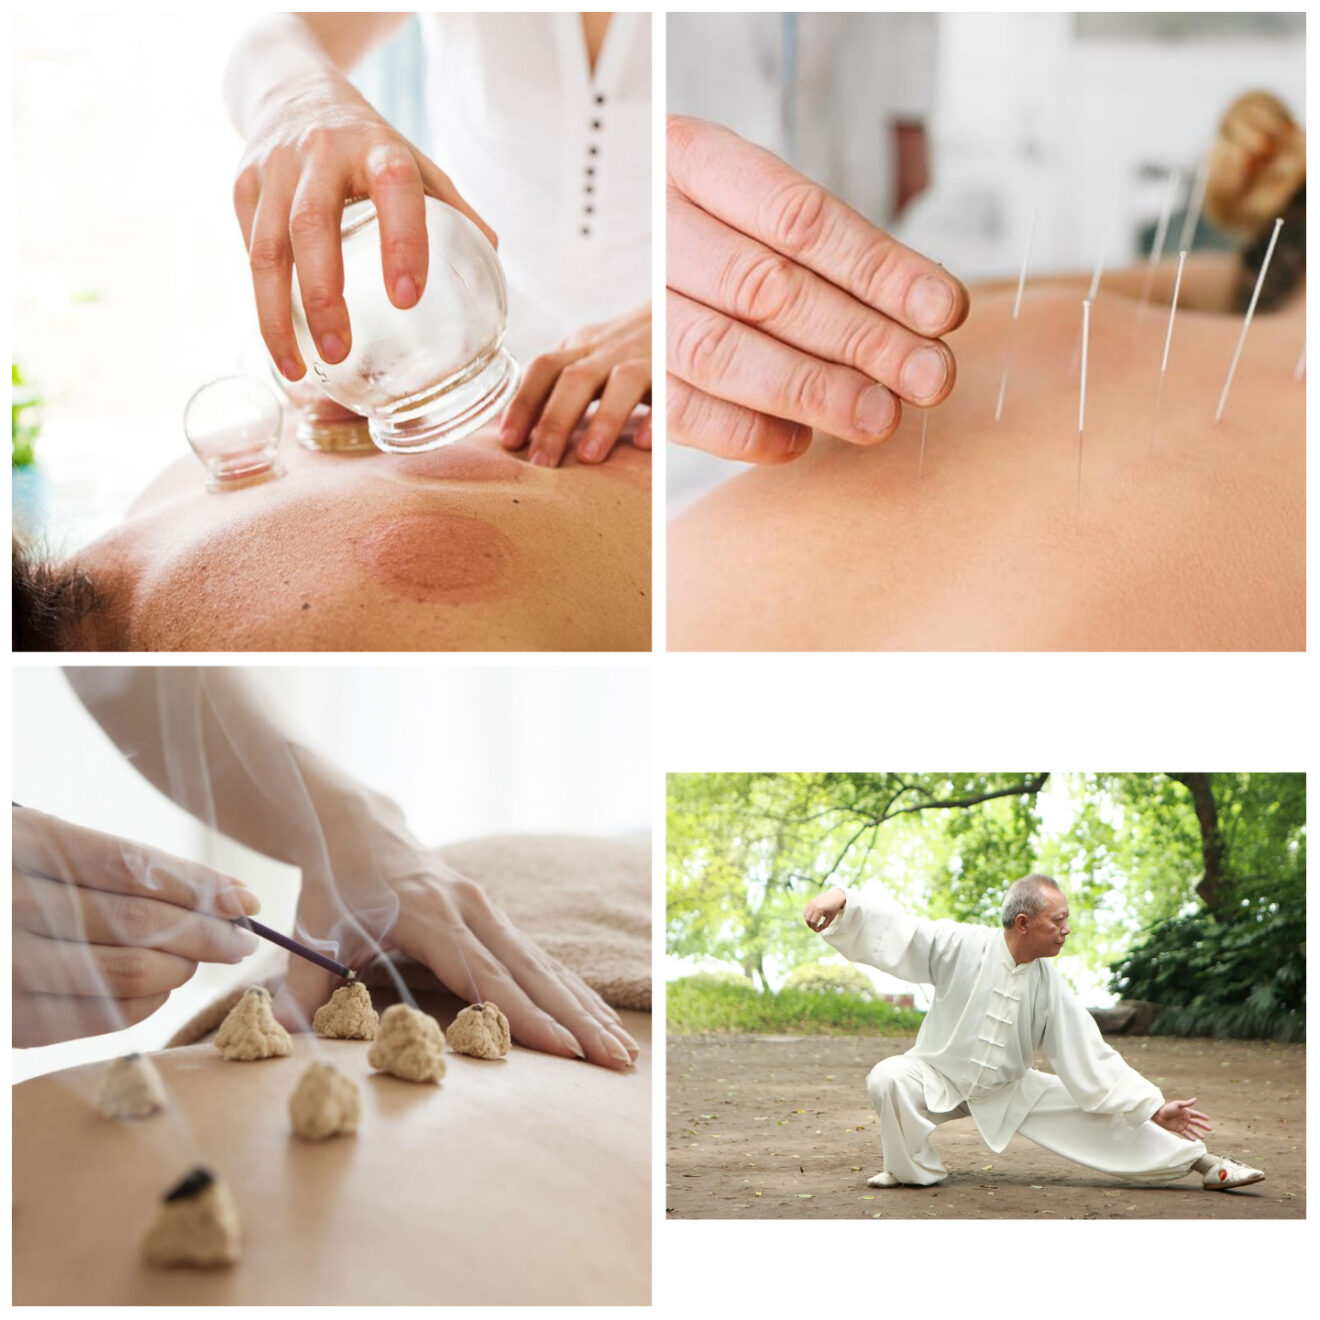 Cupping; top left (The Thirty), Acupuncture; top right (Forbes), Moxibustion; bottom left (American institute of Alternative Medicine), Tai Chi; bottom right (Britannica)